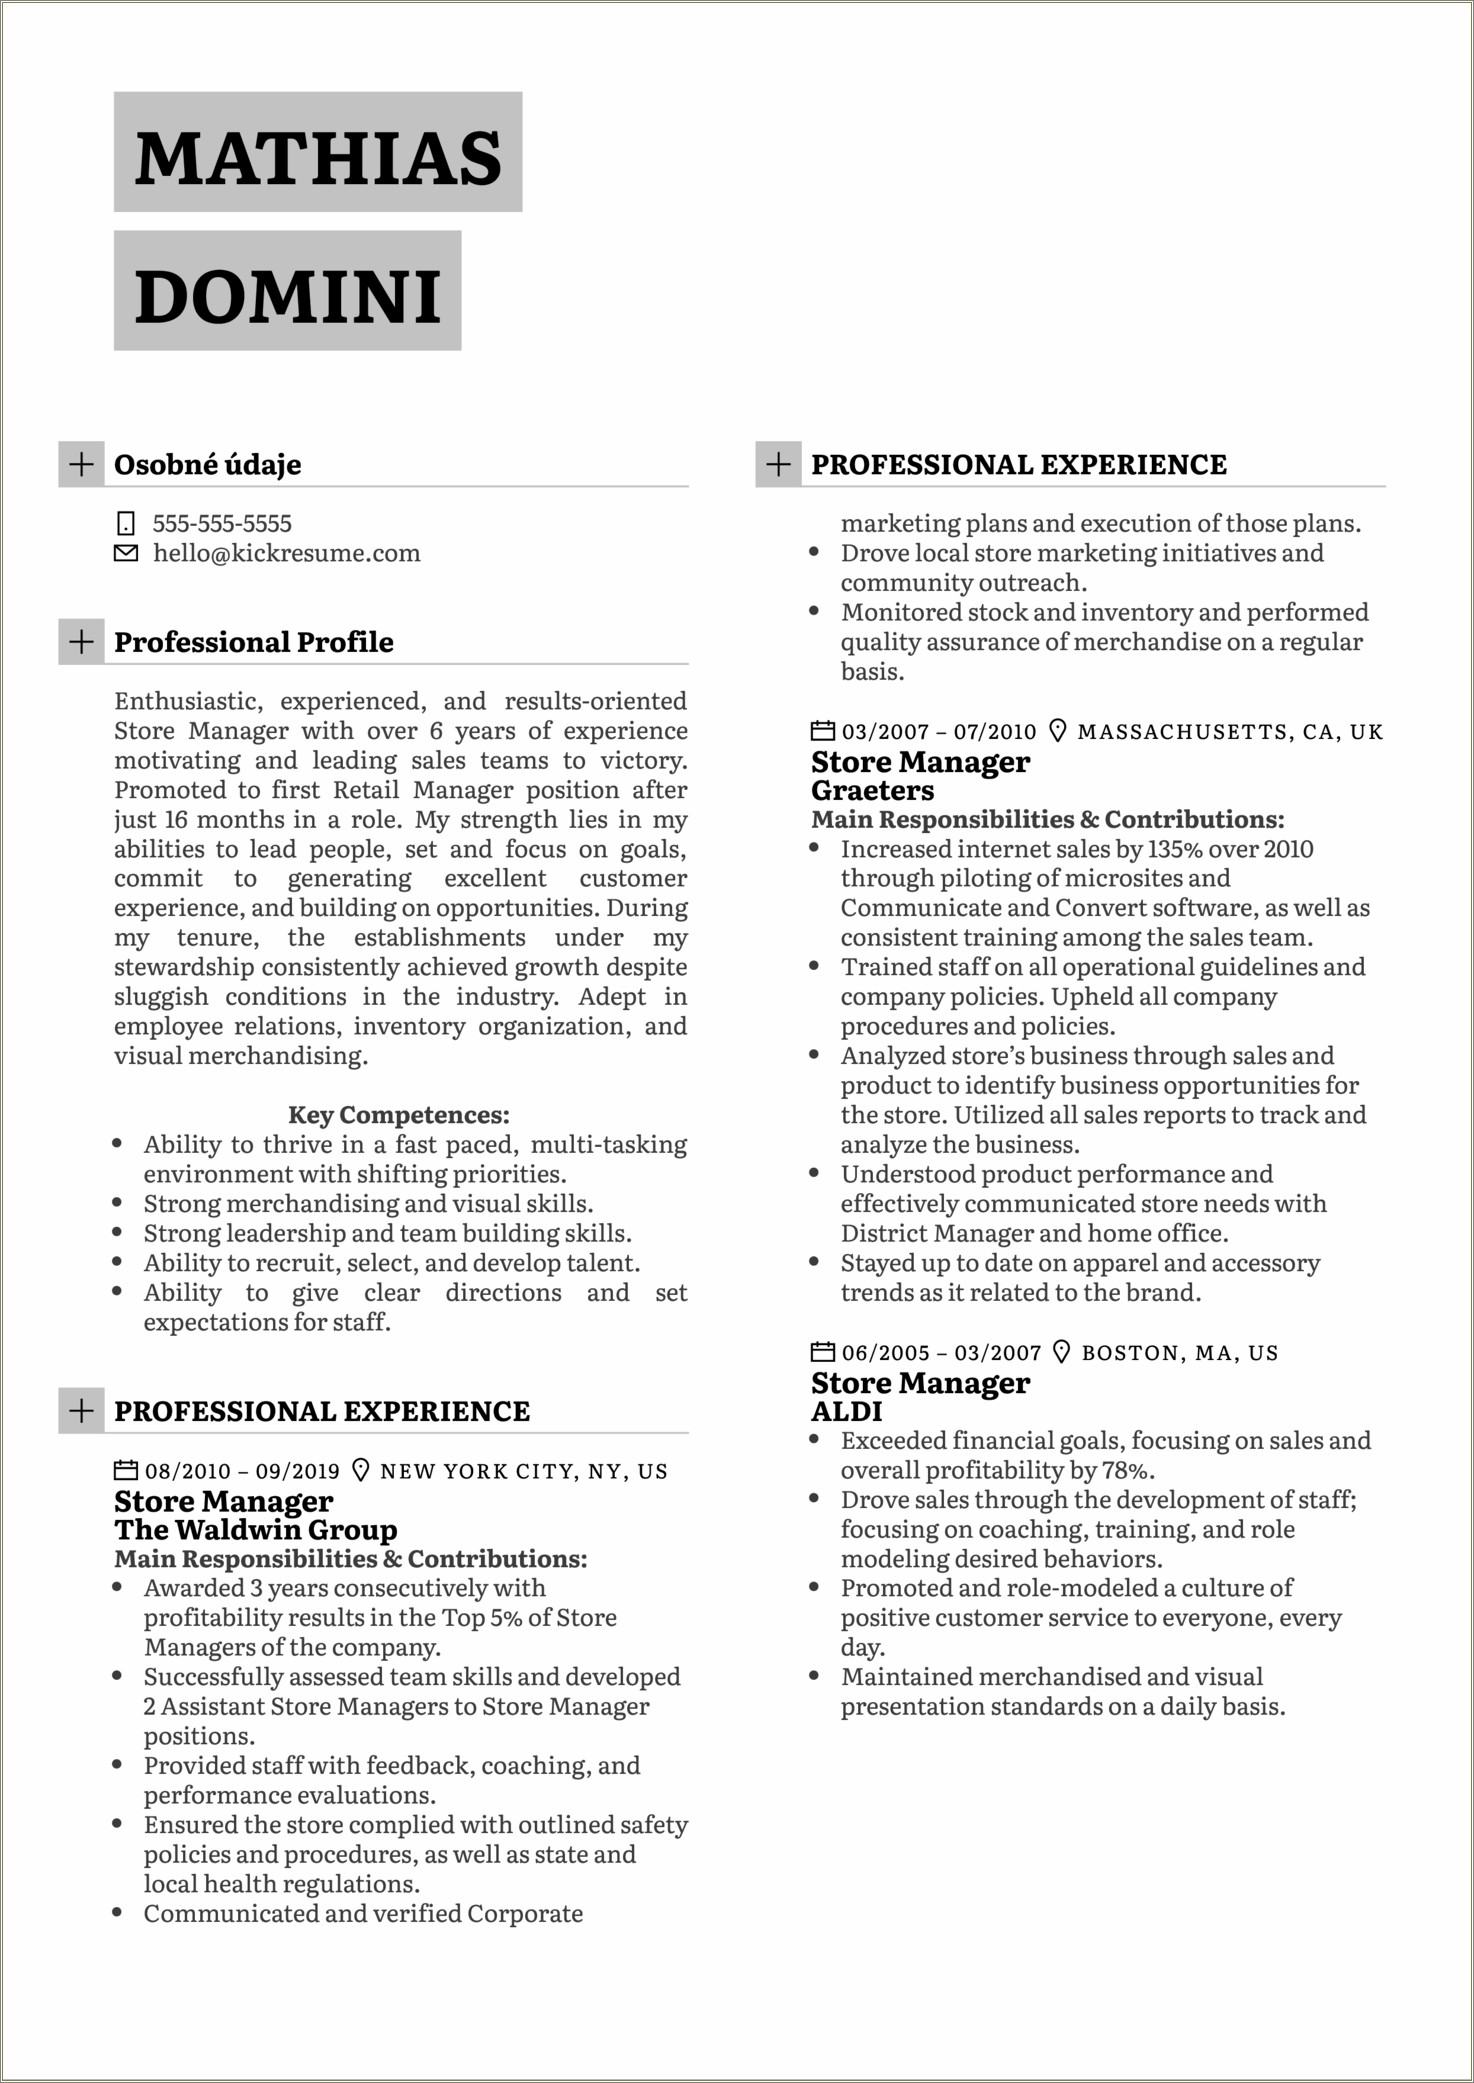 Positive Skills And Abilities For Resume